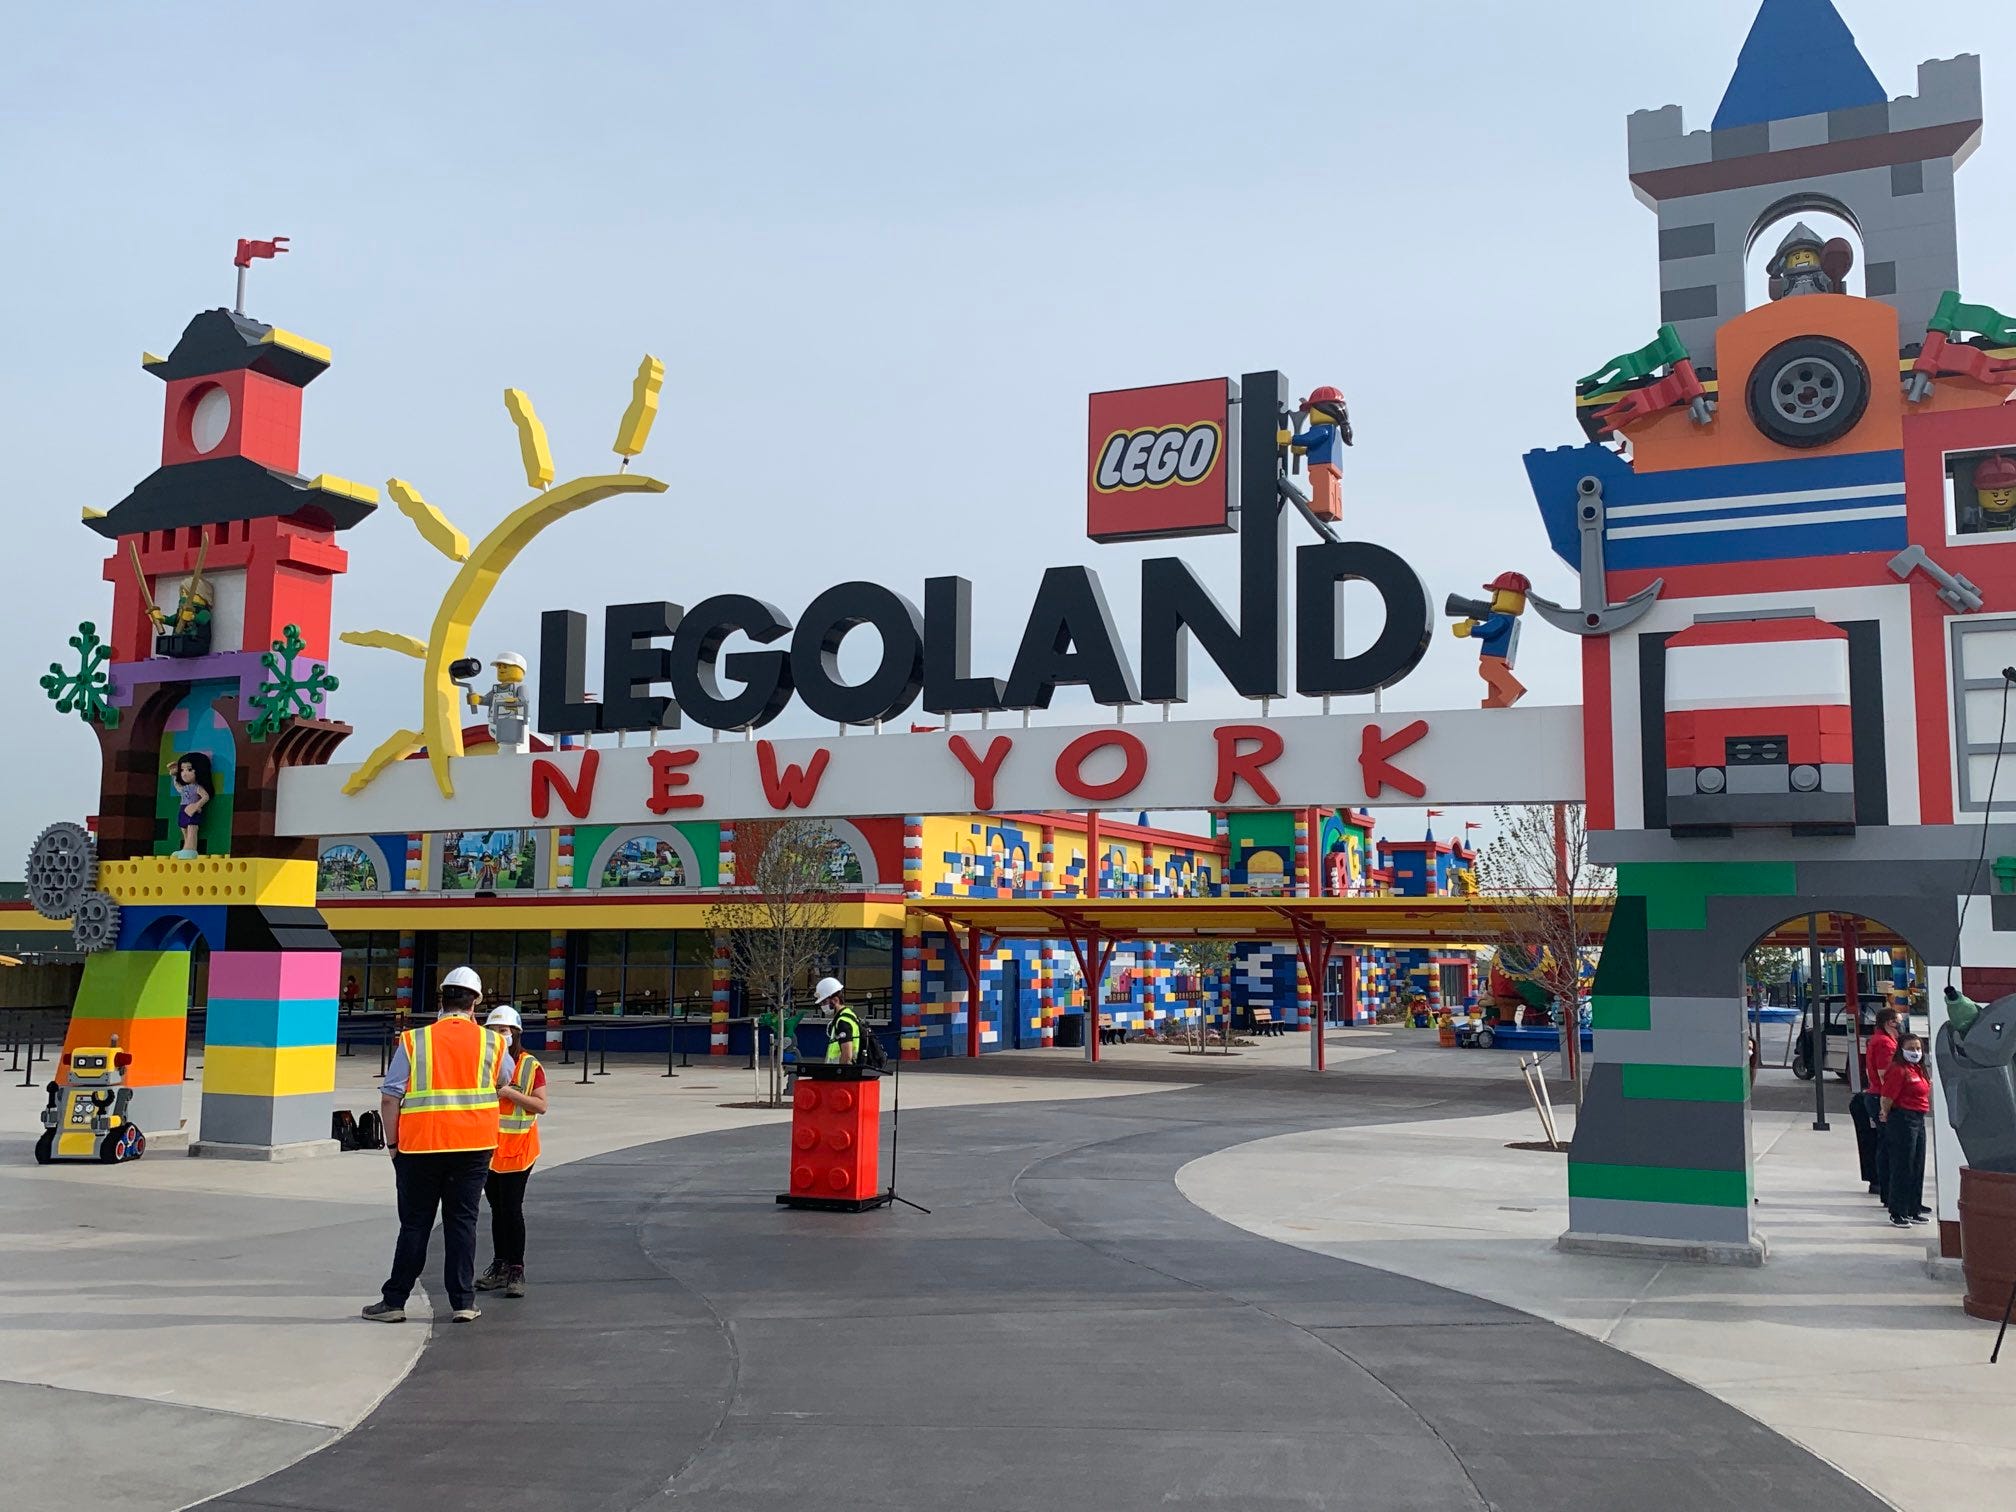 Legoland New York: Get a first look inside the theme park set to open this summer